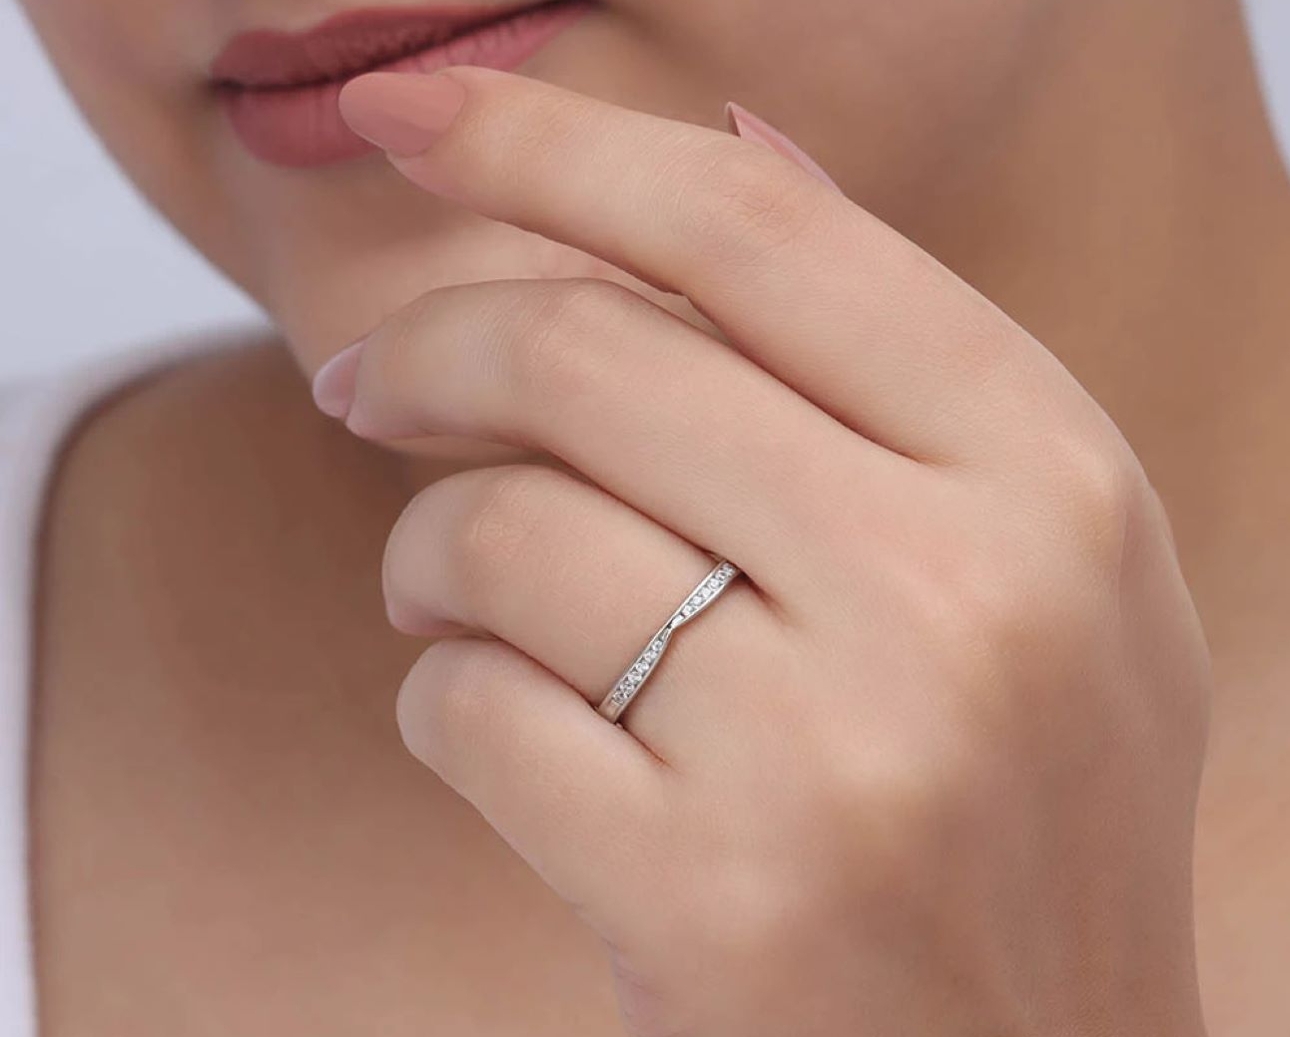 woman's hand with wedding band on it raising hand to her face